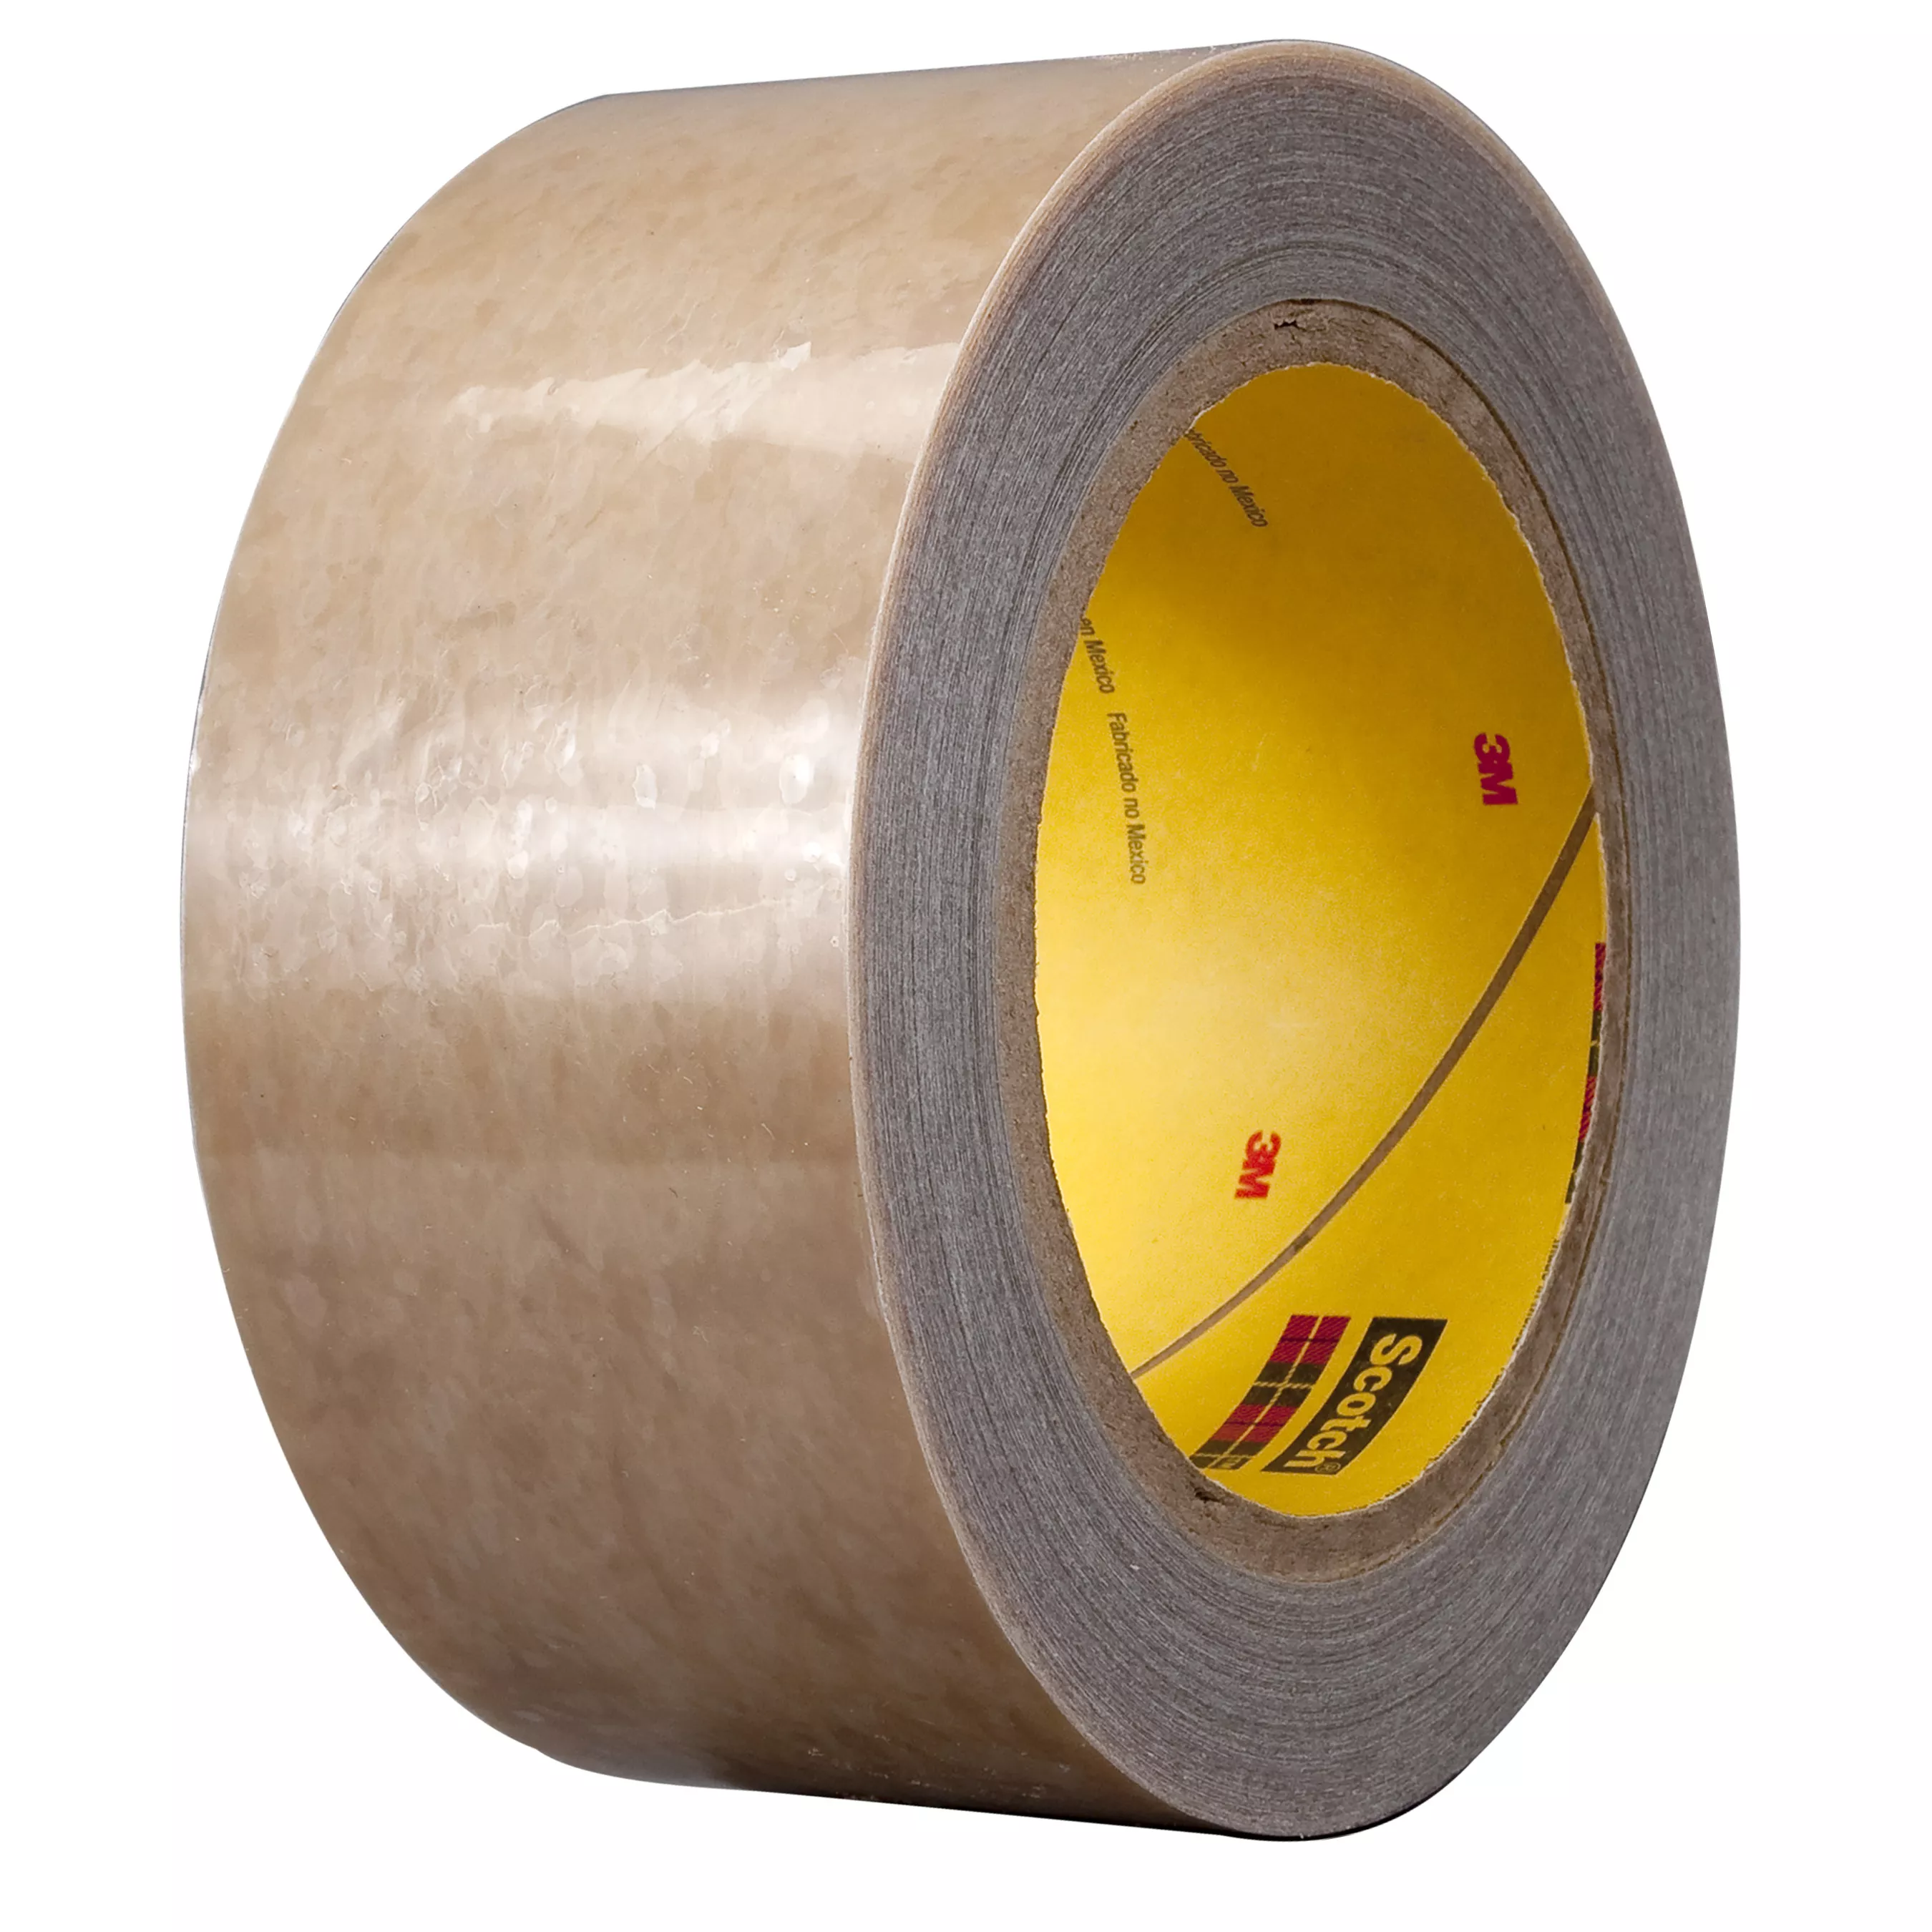 3M™ Polyester Protective Tape 336, Transparent, 4 in x 144 yd, 1.5 mil,
2 Roll/Case